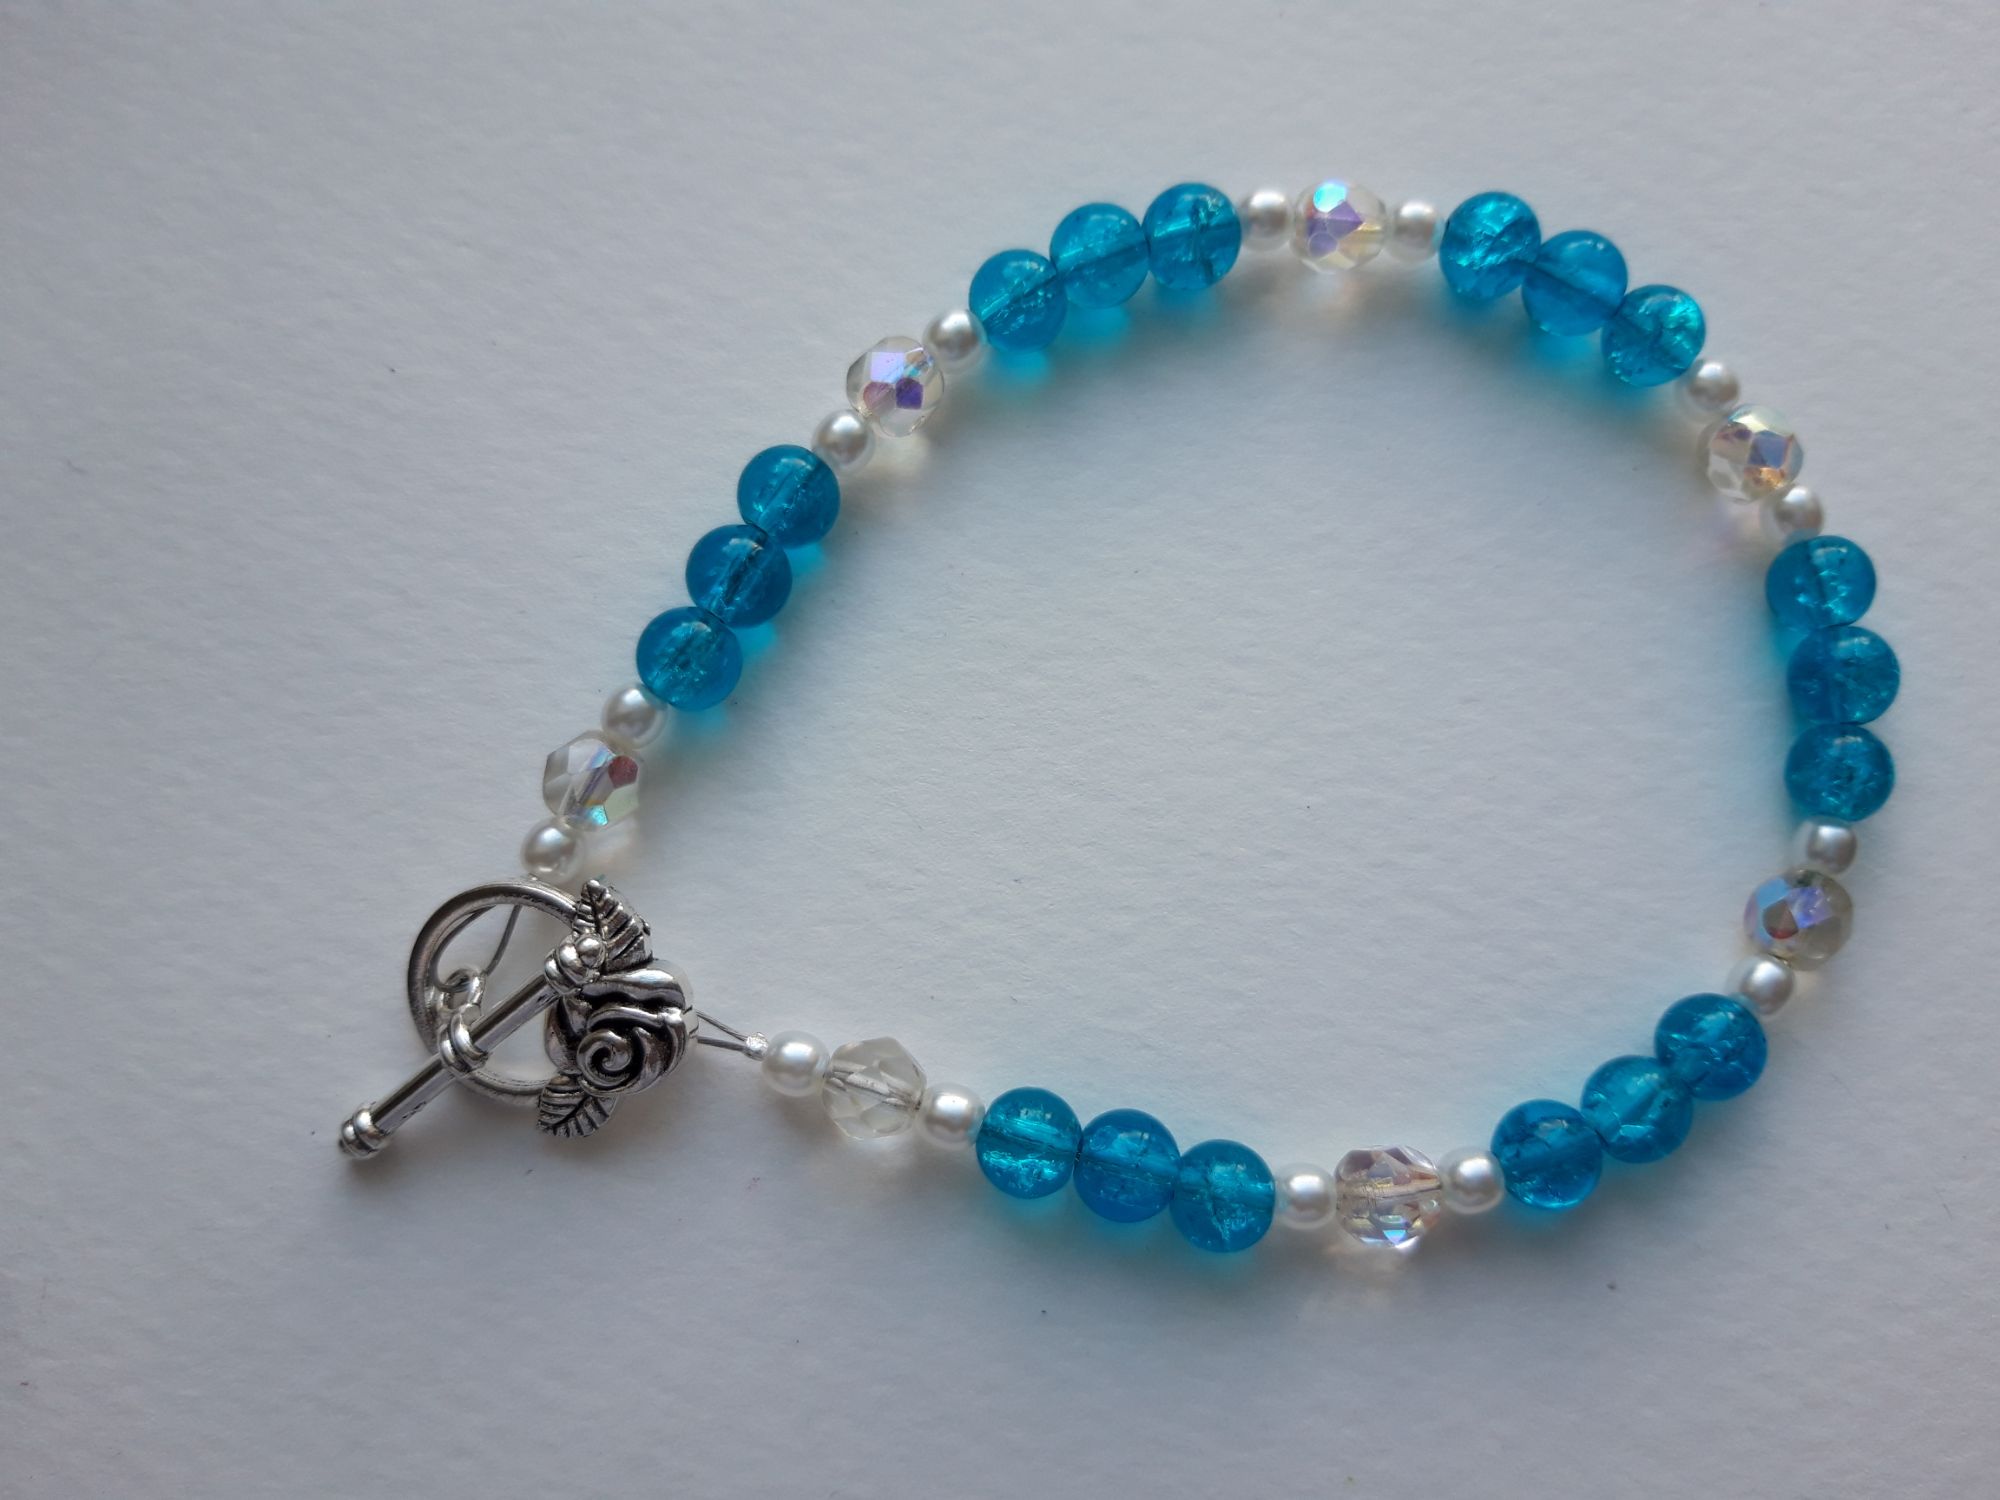 Handmade Bracelet using blue beads and a toggle fasten